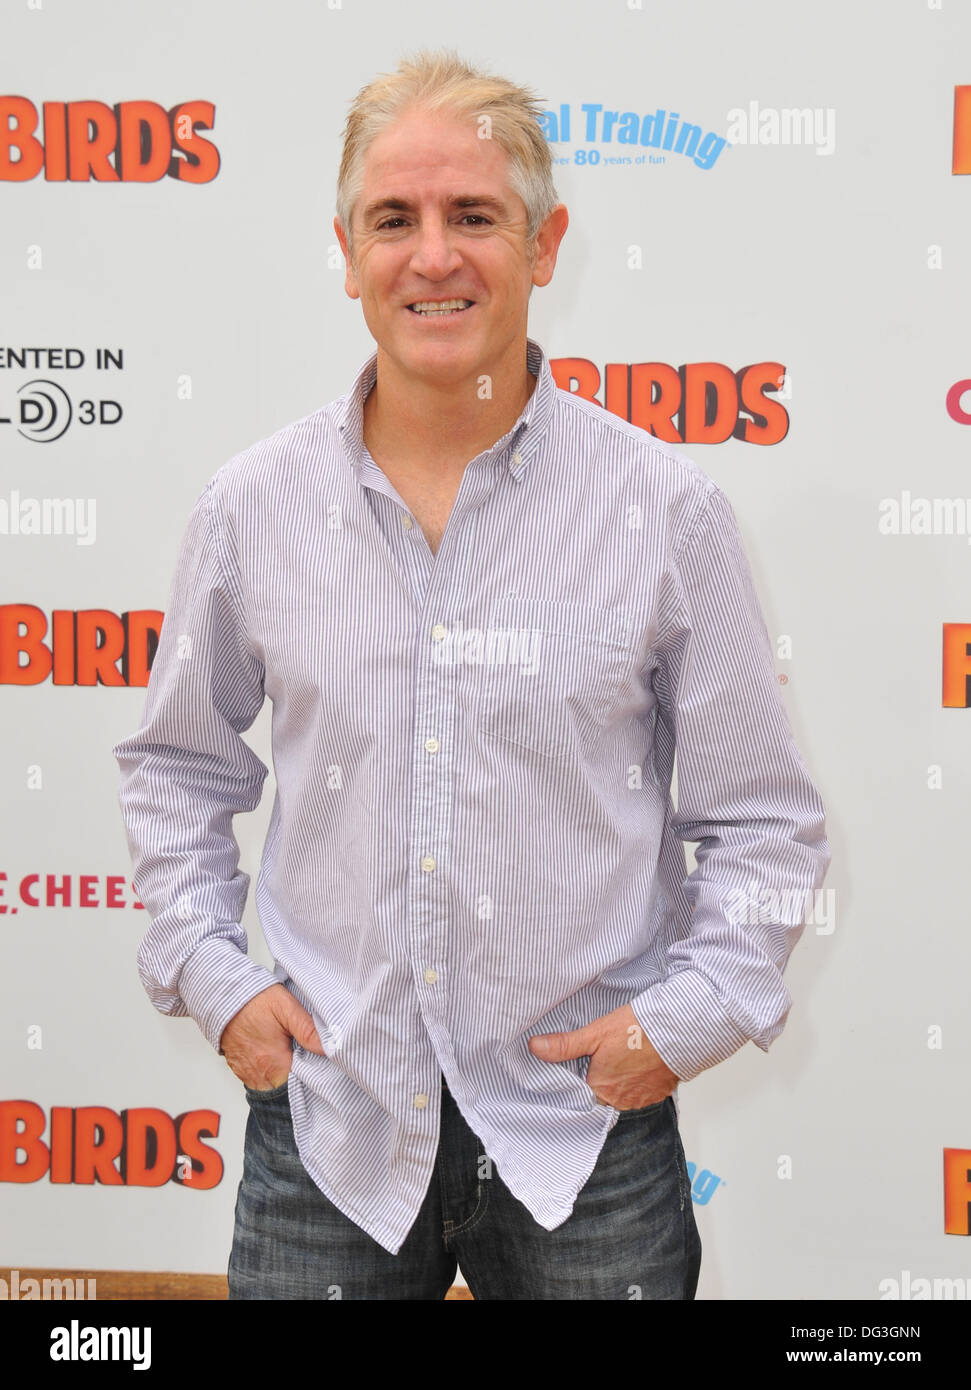 Los Angeles, California, USA. 13th Oct, 2013. Carlos Alazraqui attending the Los Angeles Premiere of ''Free Birds'' held at the Westwood Village Theatre in Westwood, California on October 13, 2013. 2013 Credit:  D. Long/Globe Photos/ZUMAPRESS.com/Alamy Live News Stock Photo